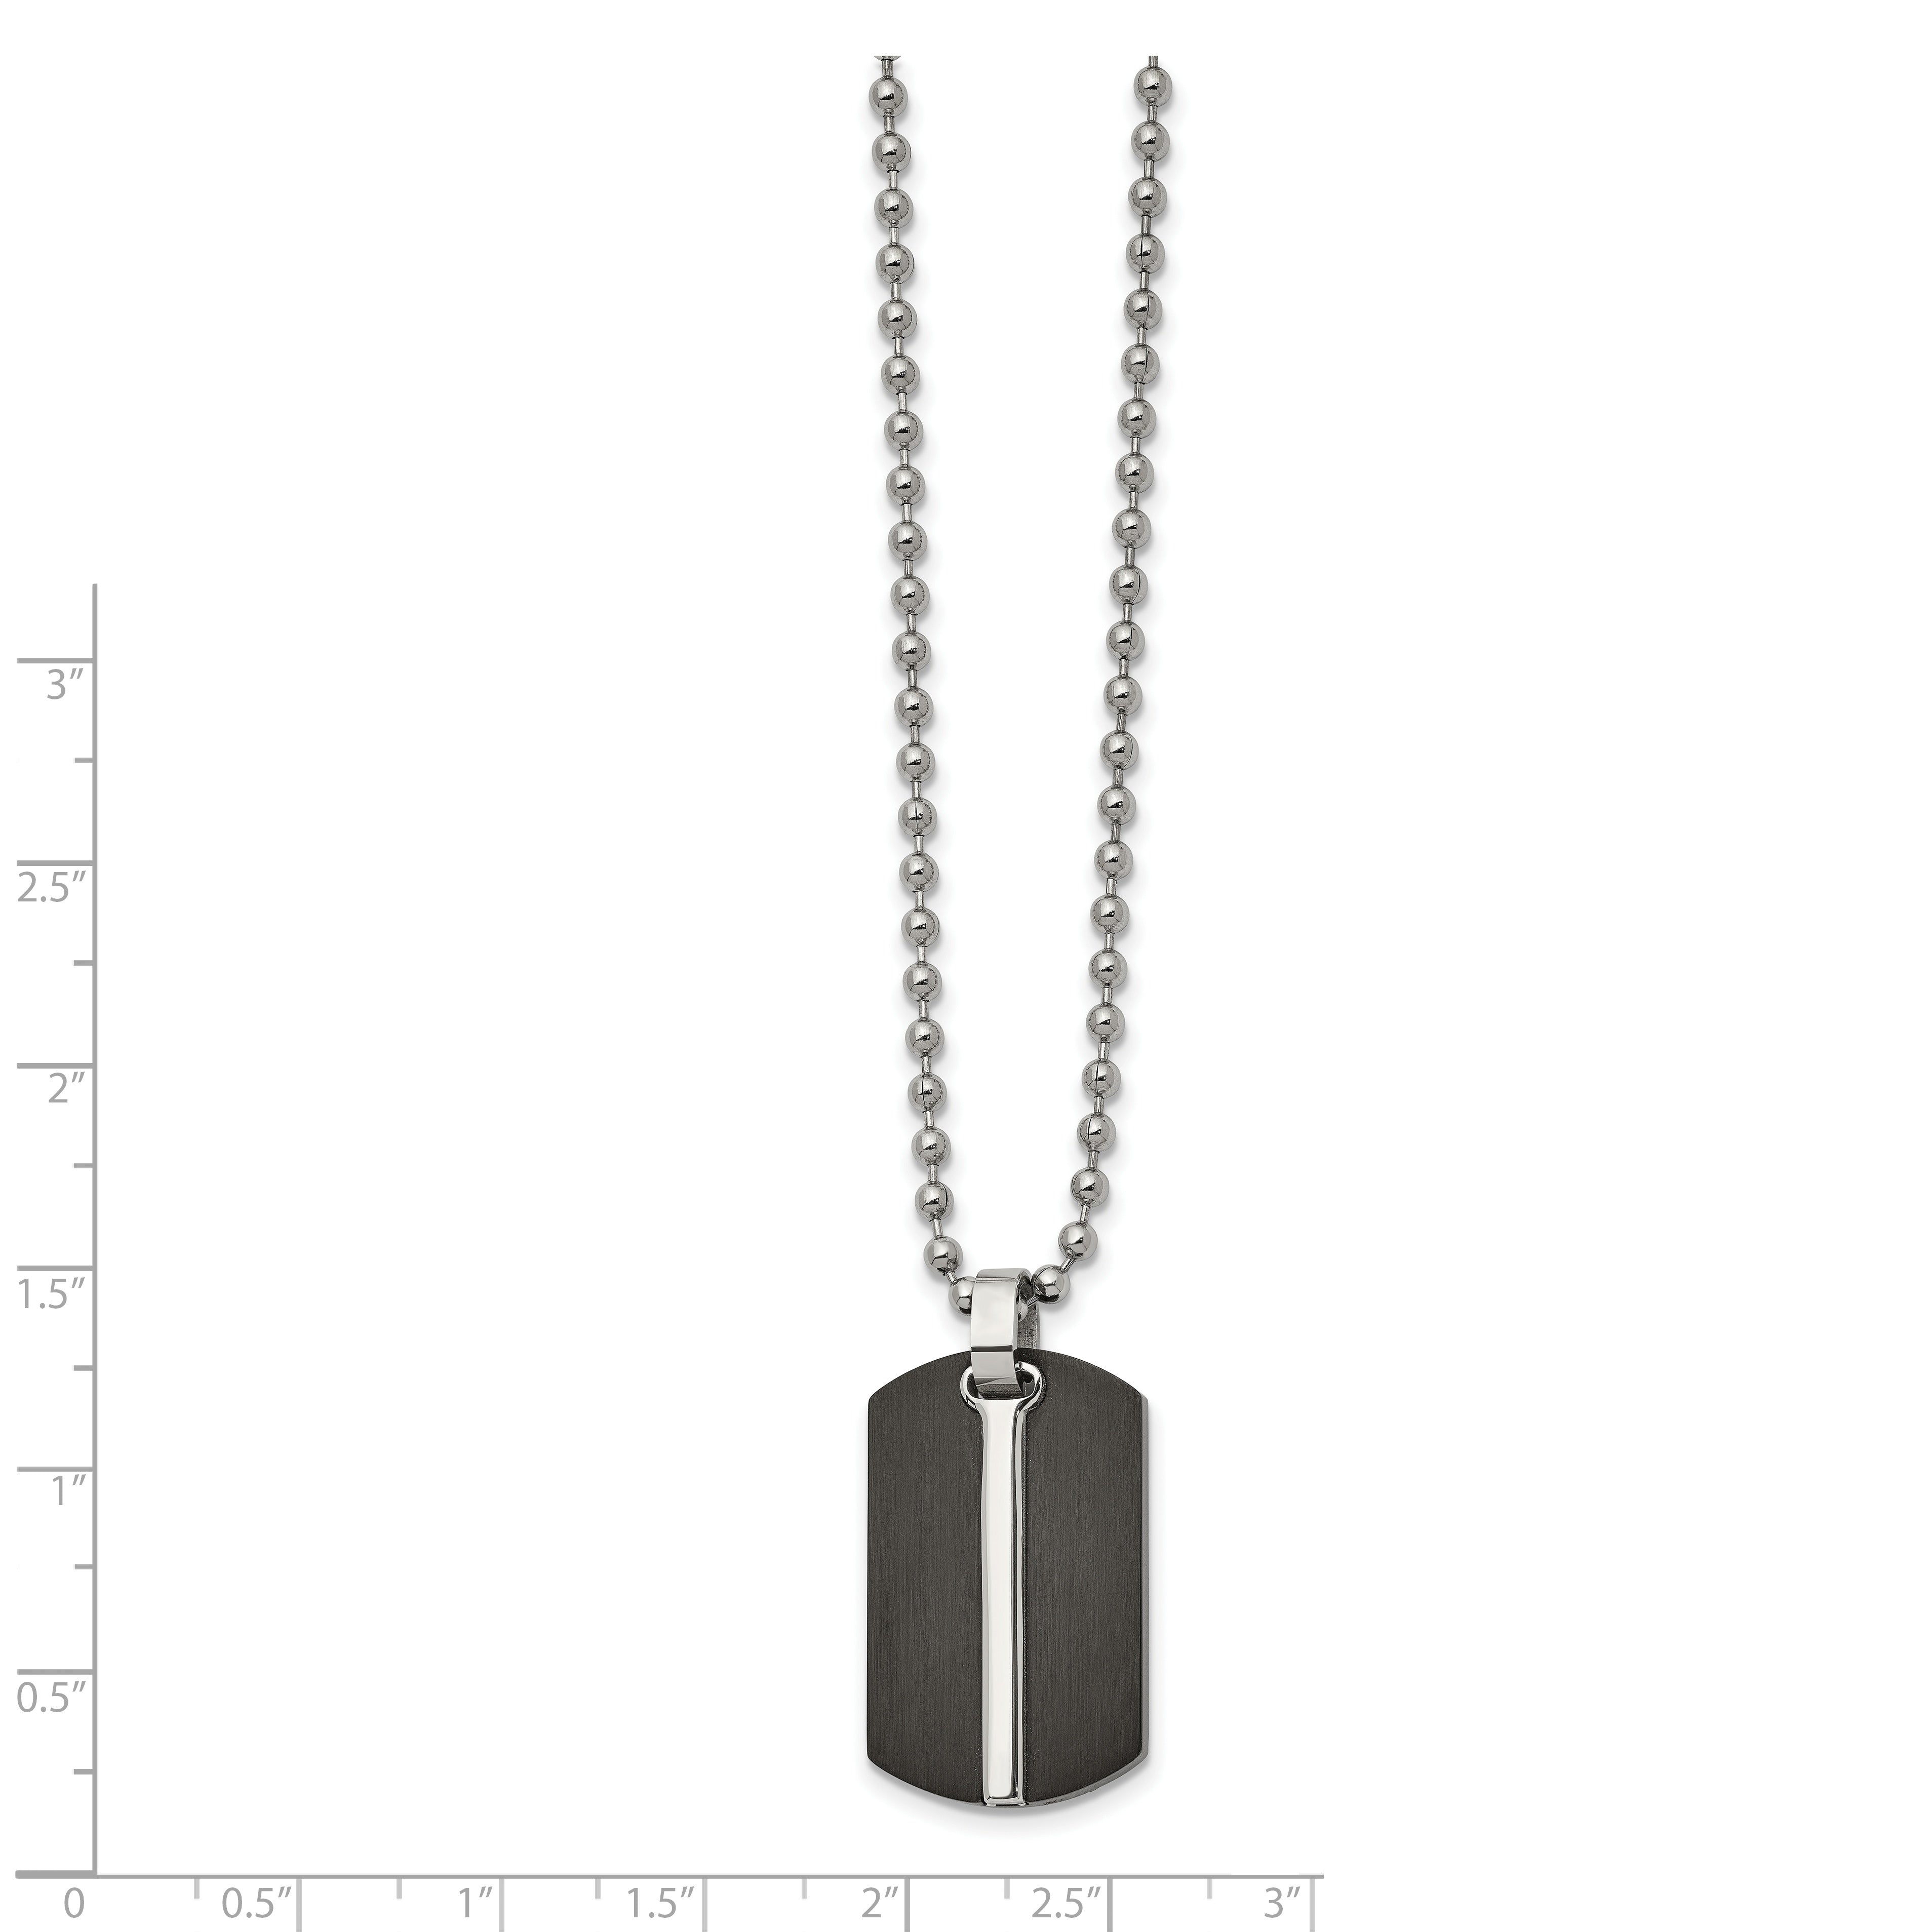 Chisel Stainless Steel Brushed and Polished Black IP-plated Dog Tag on a 24 inch Ball Chain Necklace